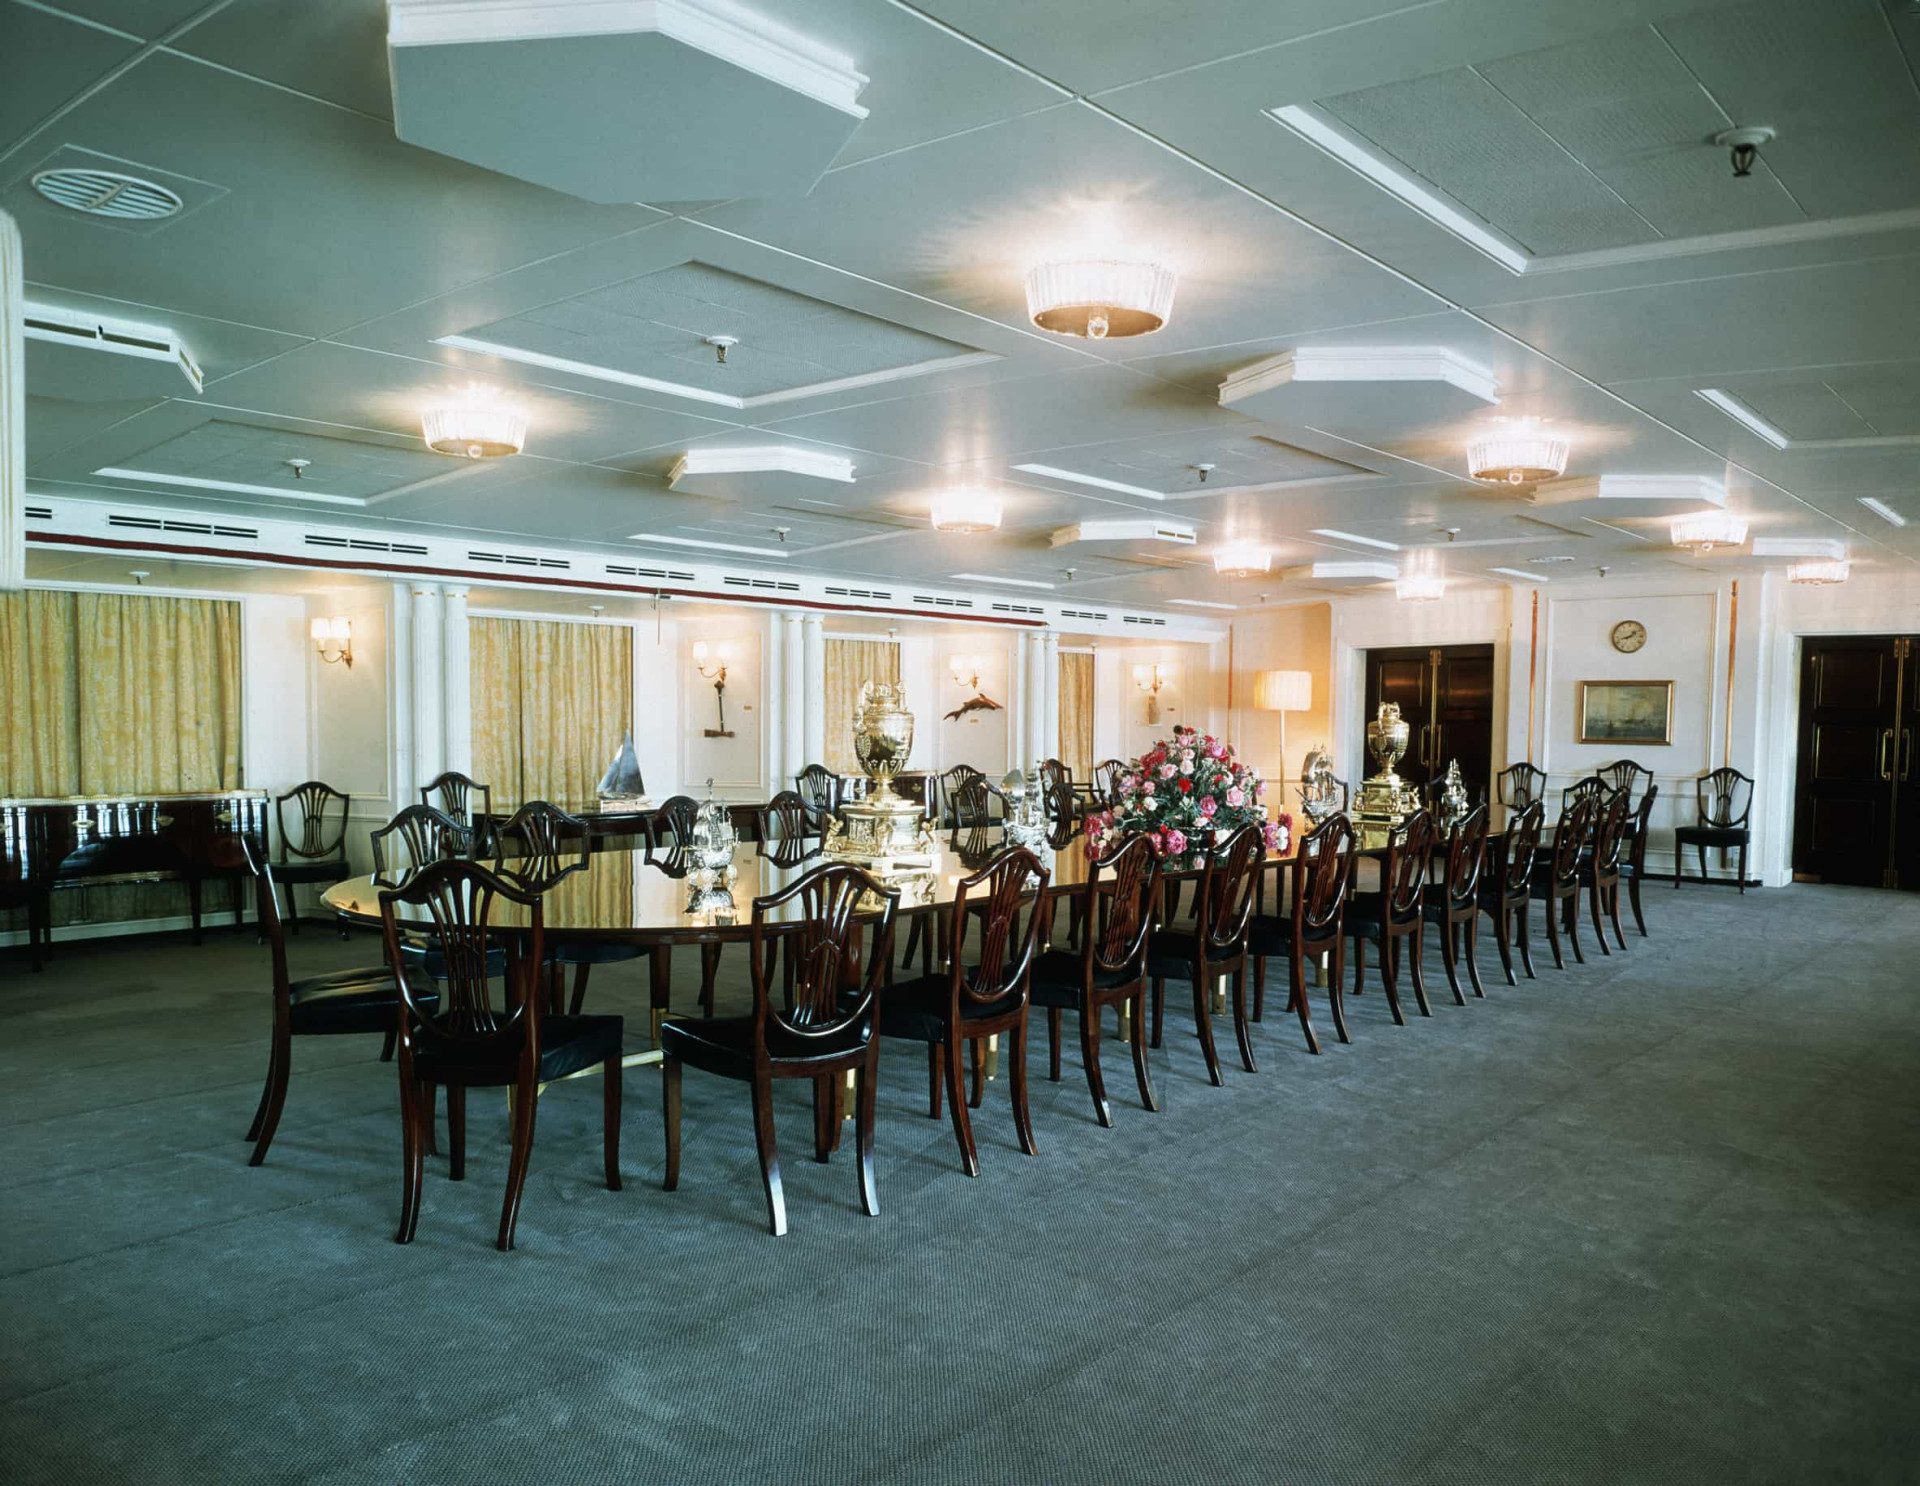 <p>The Reagan's dined in <em>Britannia</em>'s grand dining room (pictured), which could host up to 56 guests. The dining room was set within the ship's royal apartments and included a lounge, drawing room, and guest bedrooms.</p><p>You may also like:<a href="https://www.starsinsider.com/n/394229?utm_source=msn.com&utm_medium=display&utm_campaign=referral_description&utm_content=474709v3en-us"> All the ways Leonardo DiCaprio spends his millions</a></p>